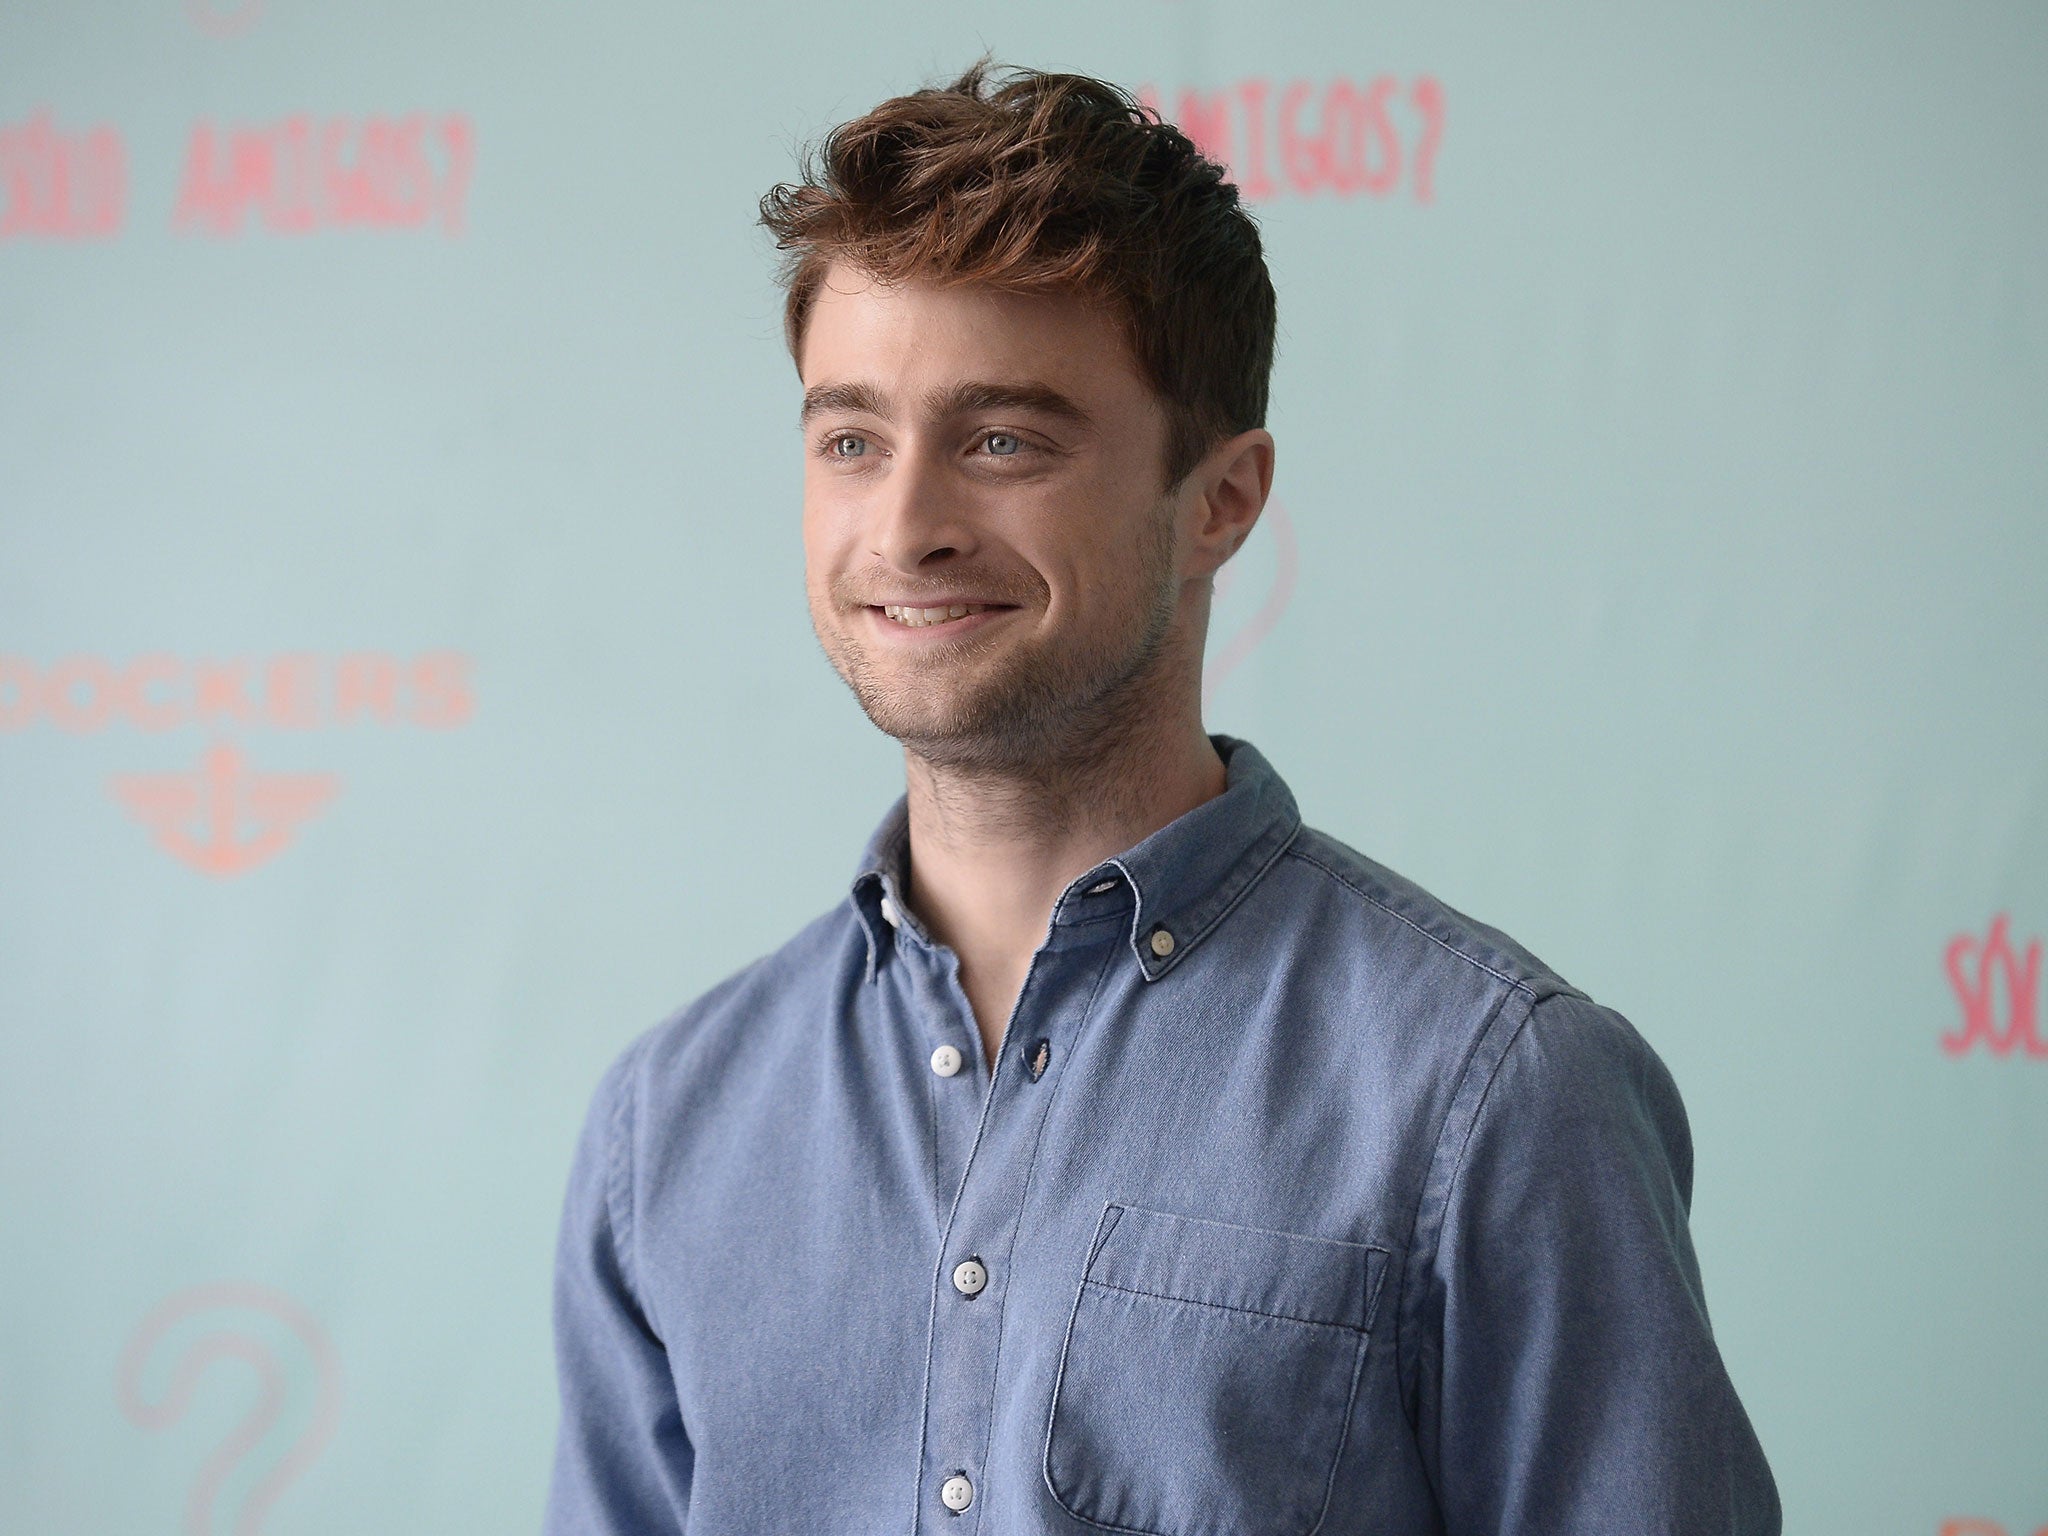 Daniel Radcliffe has his eyes on the role of Spider-Man